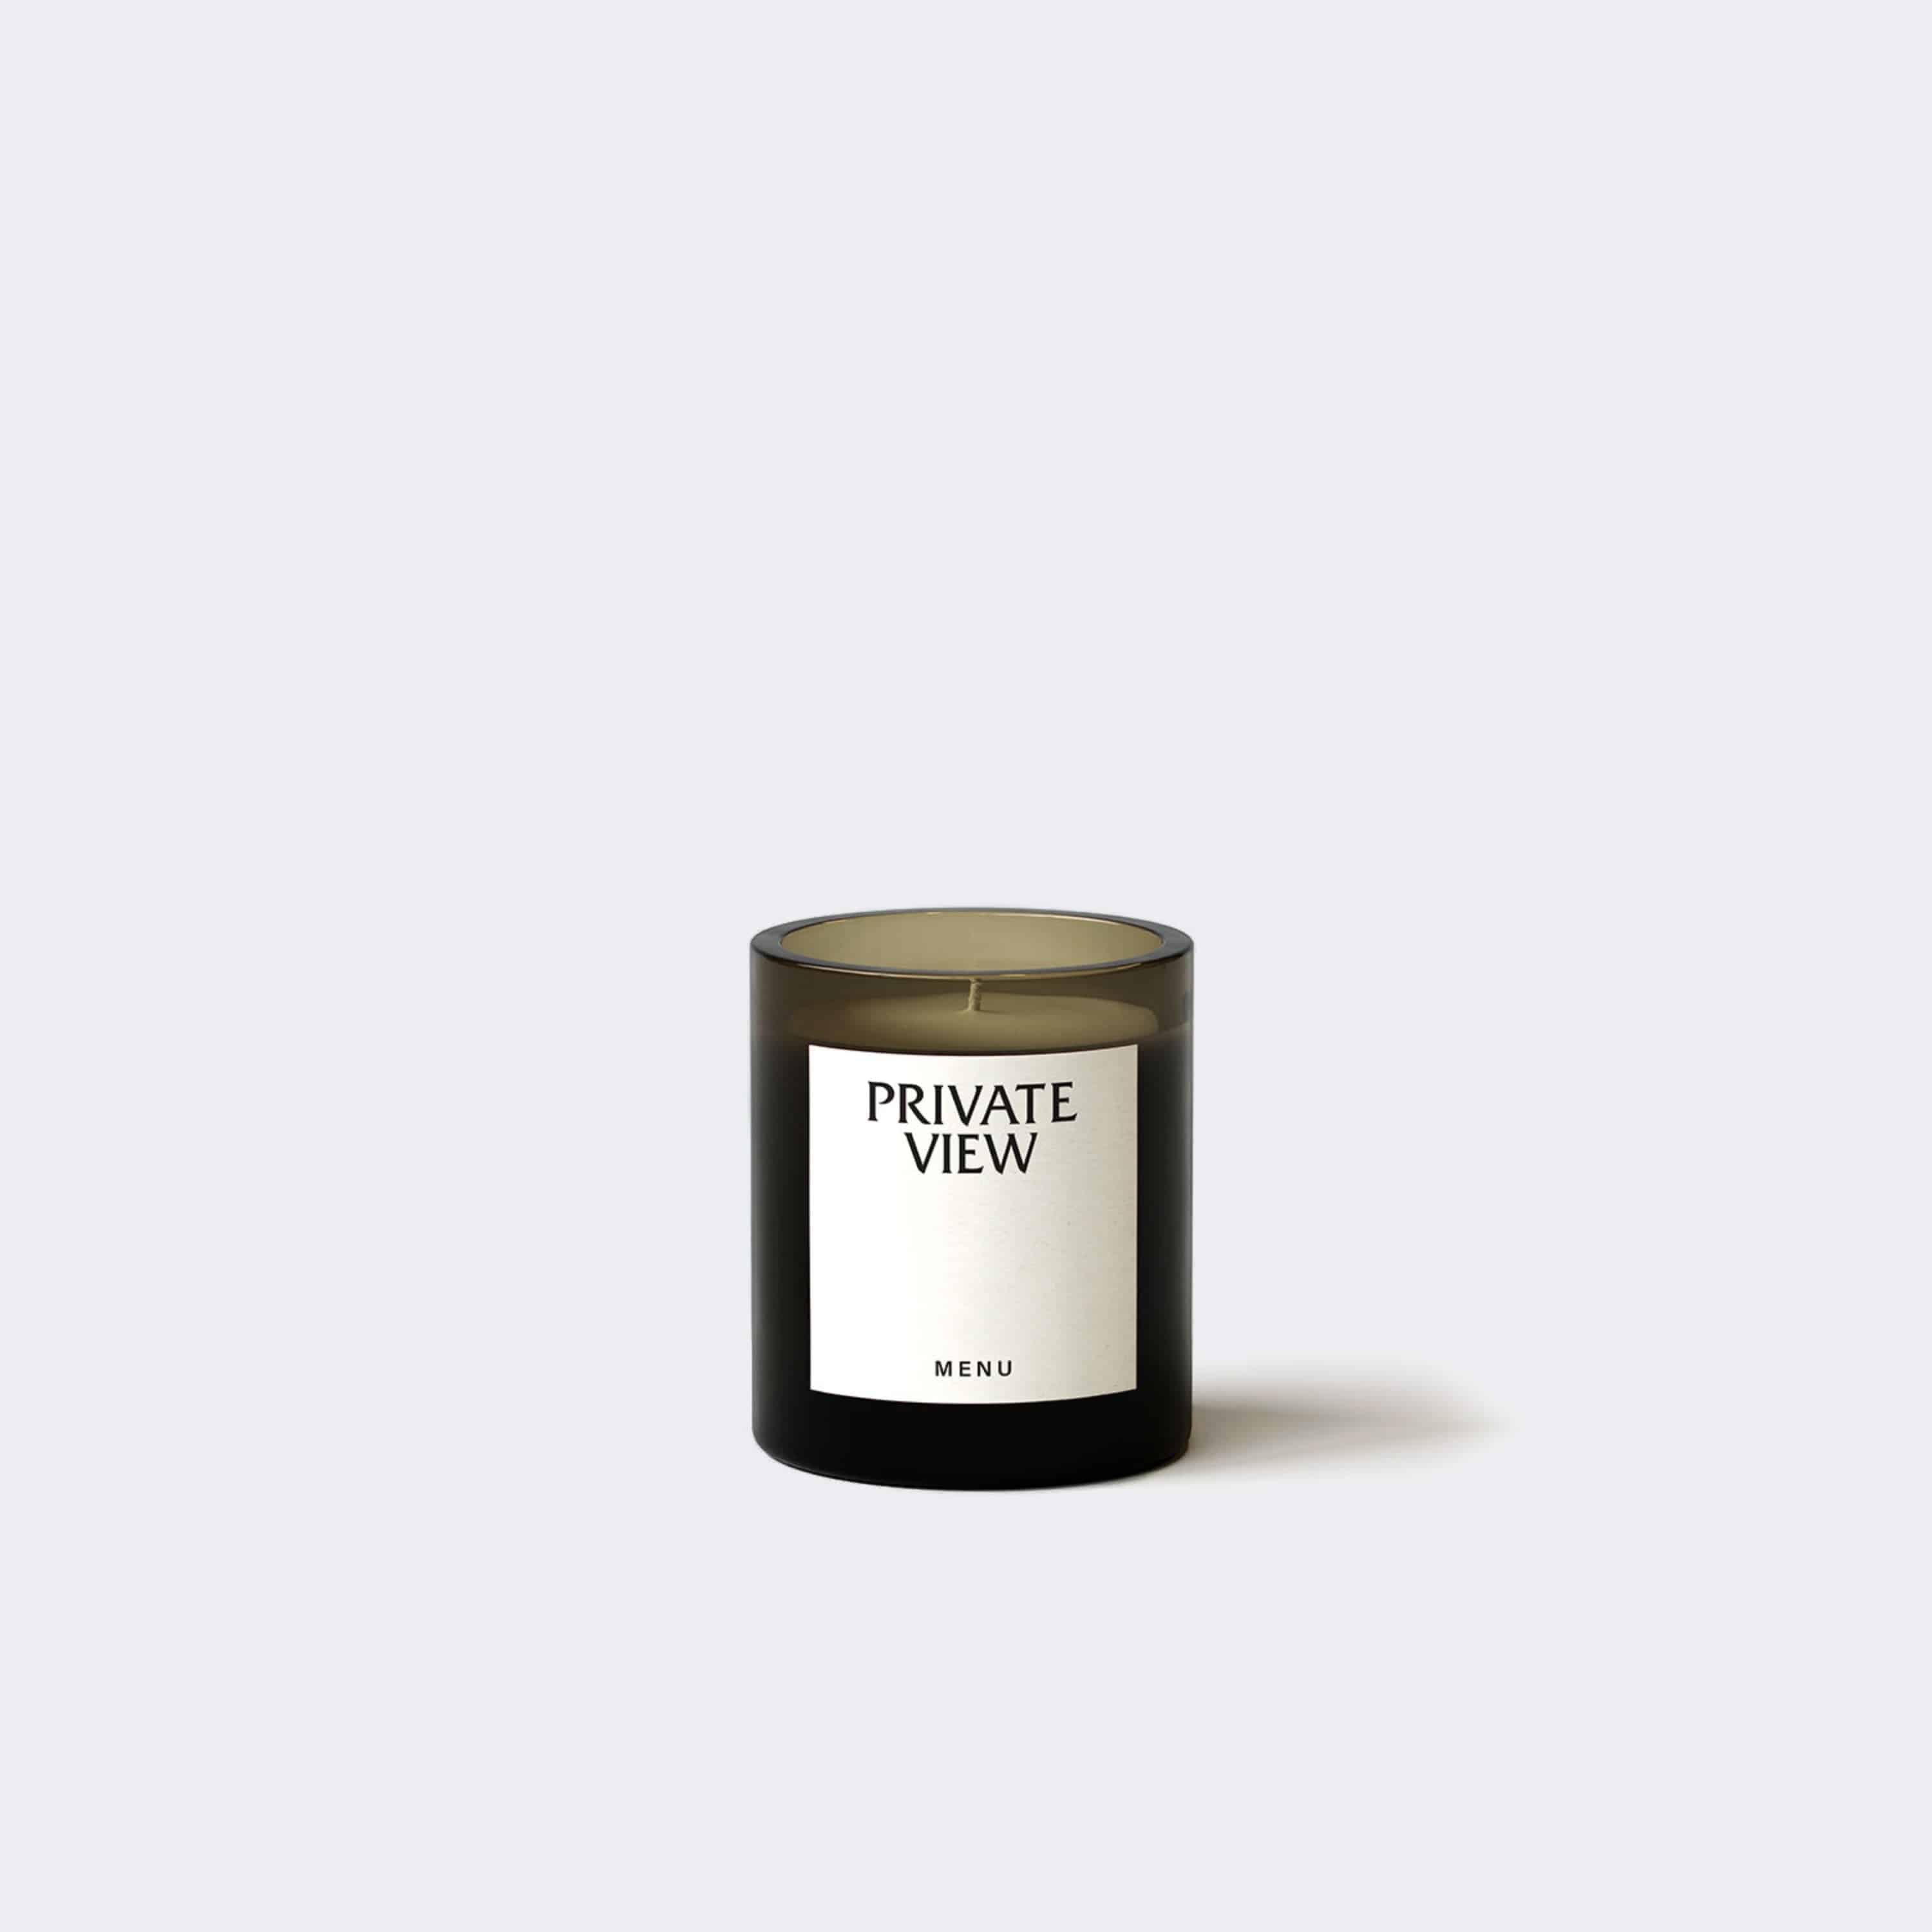 Audo Copenhagen Olfacte Scented Candle, Private View Poured Glass Candle, 8.3 oz. - KANSO#Select Size_ Poured Glass Candle, 8.3 oz.